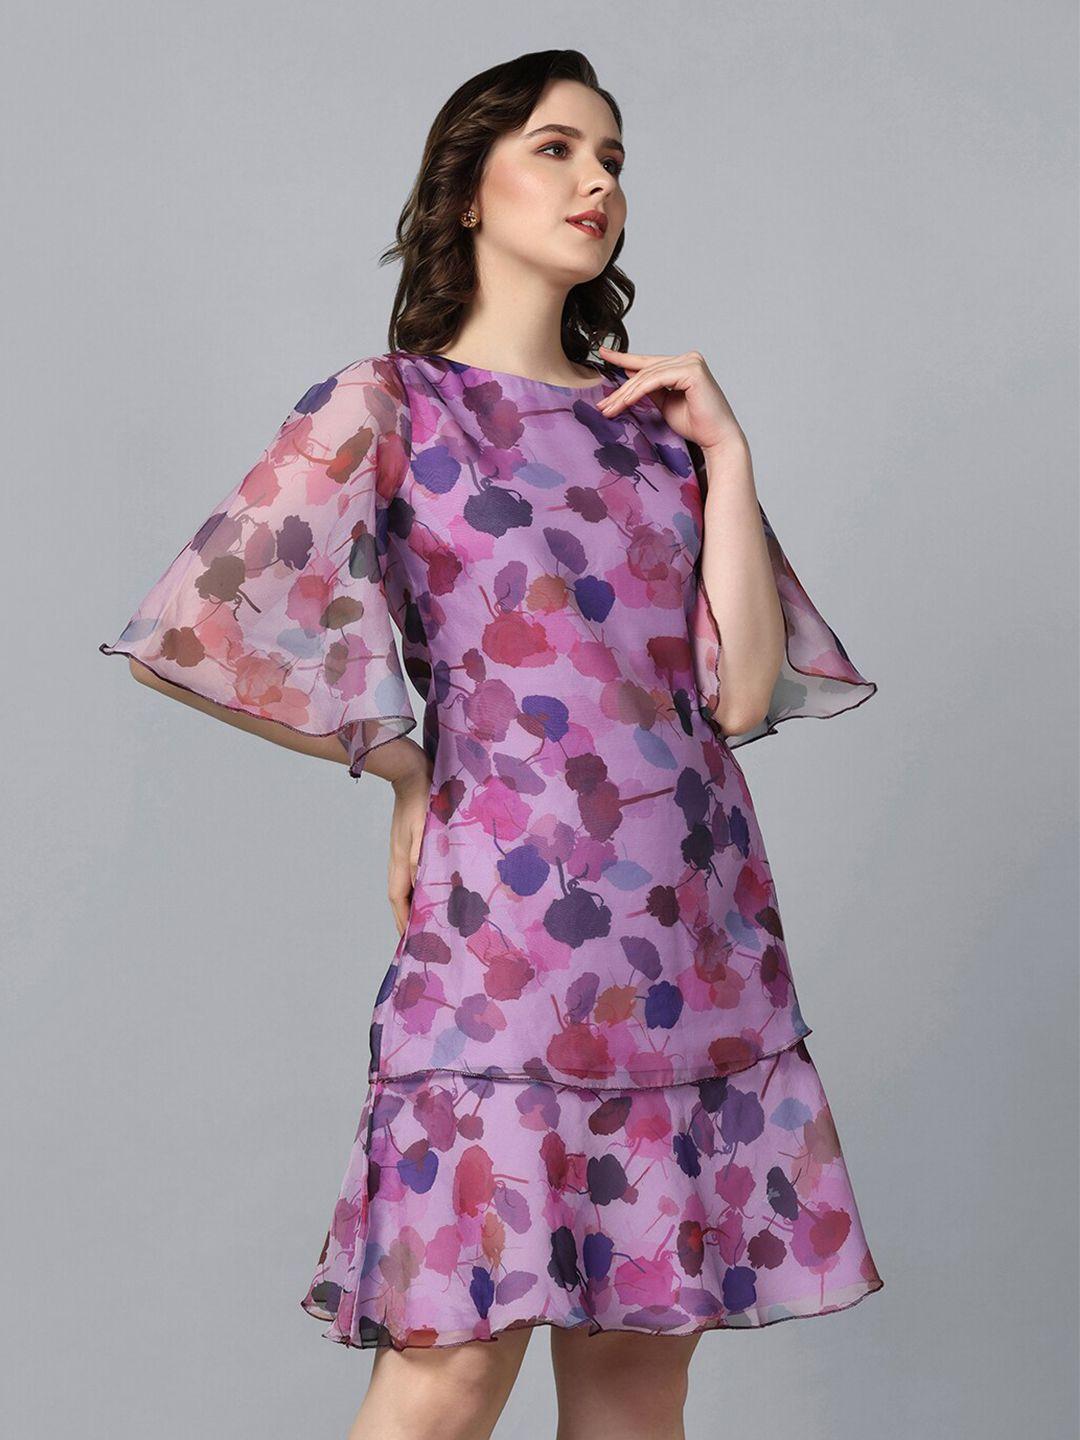 powersutra-round-neck-floral-printed-flared-sleeve-a-line-dress